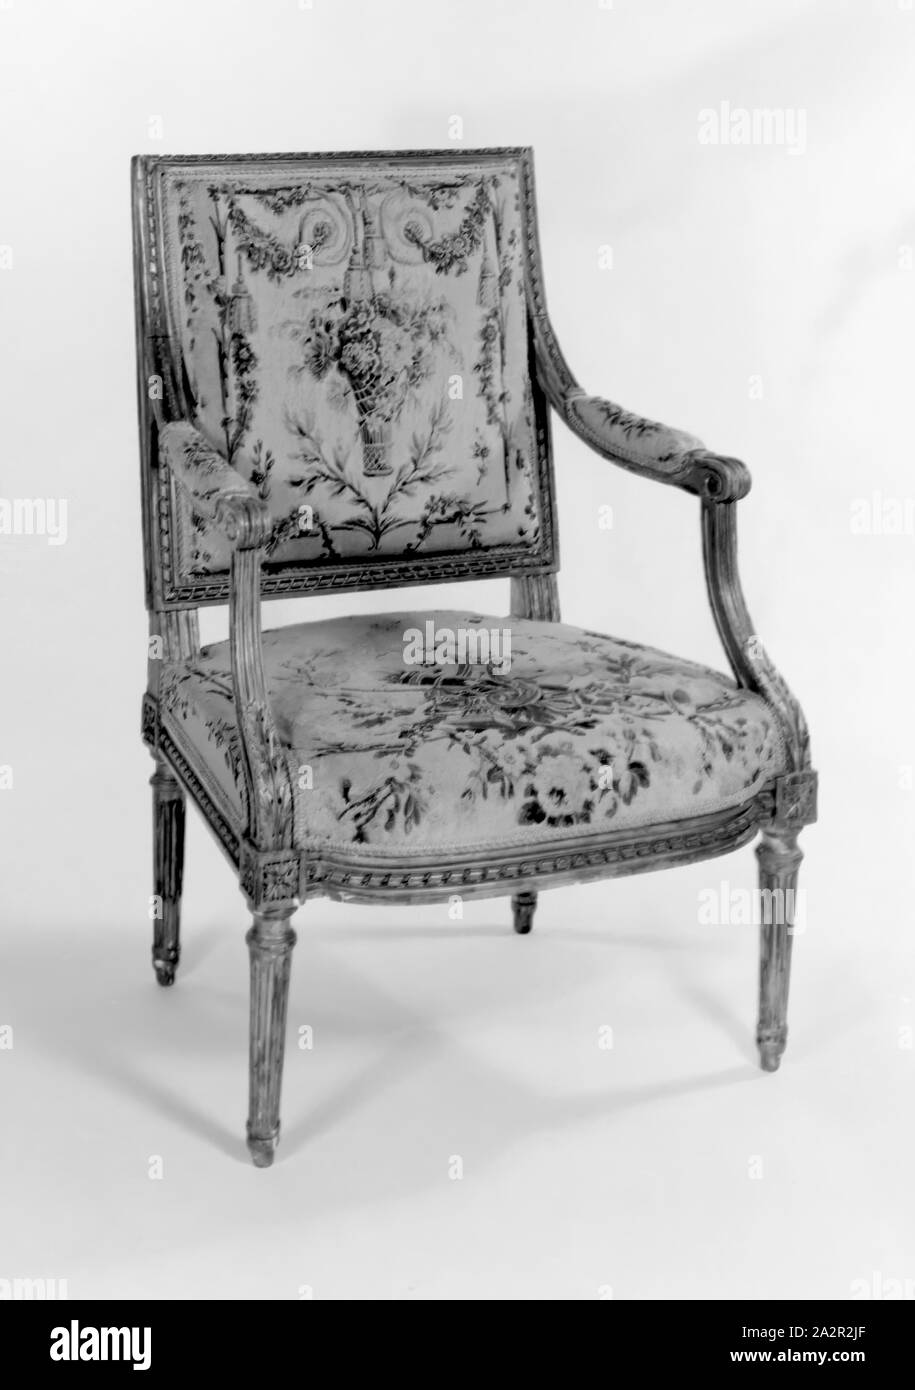 Georges Jacob, French, 1739-1814, Arm Chair, c. 1780/1785, carved and gilded beechwood frame, wool and silk upholstery (Beauvais tapestry), 35 3/4 x 25 1/8 x 22 in. (90.8 x 63.8 x 55.88 cm Stock Photo